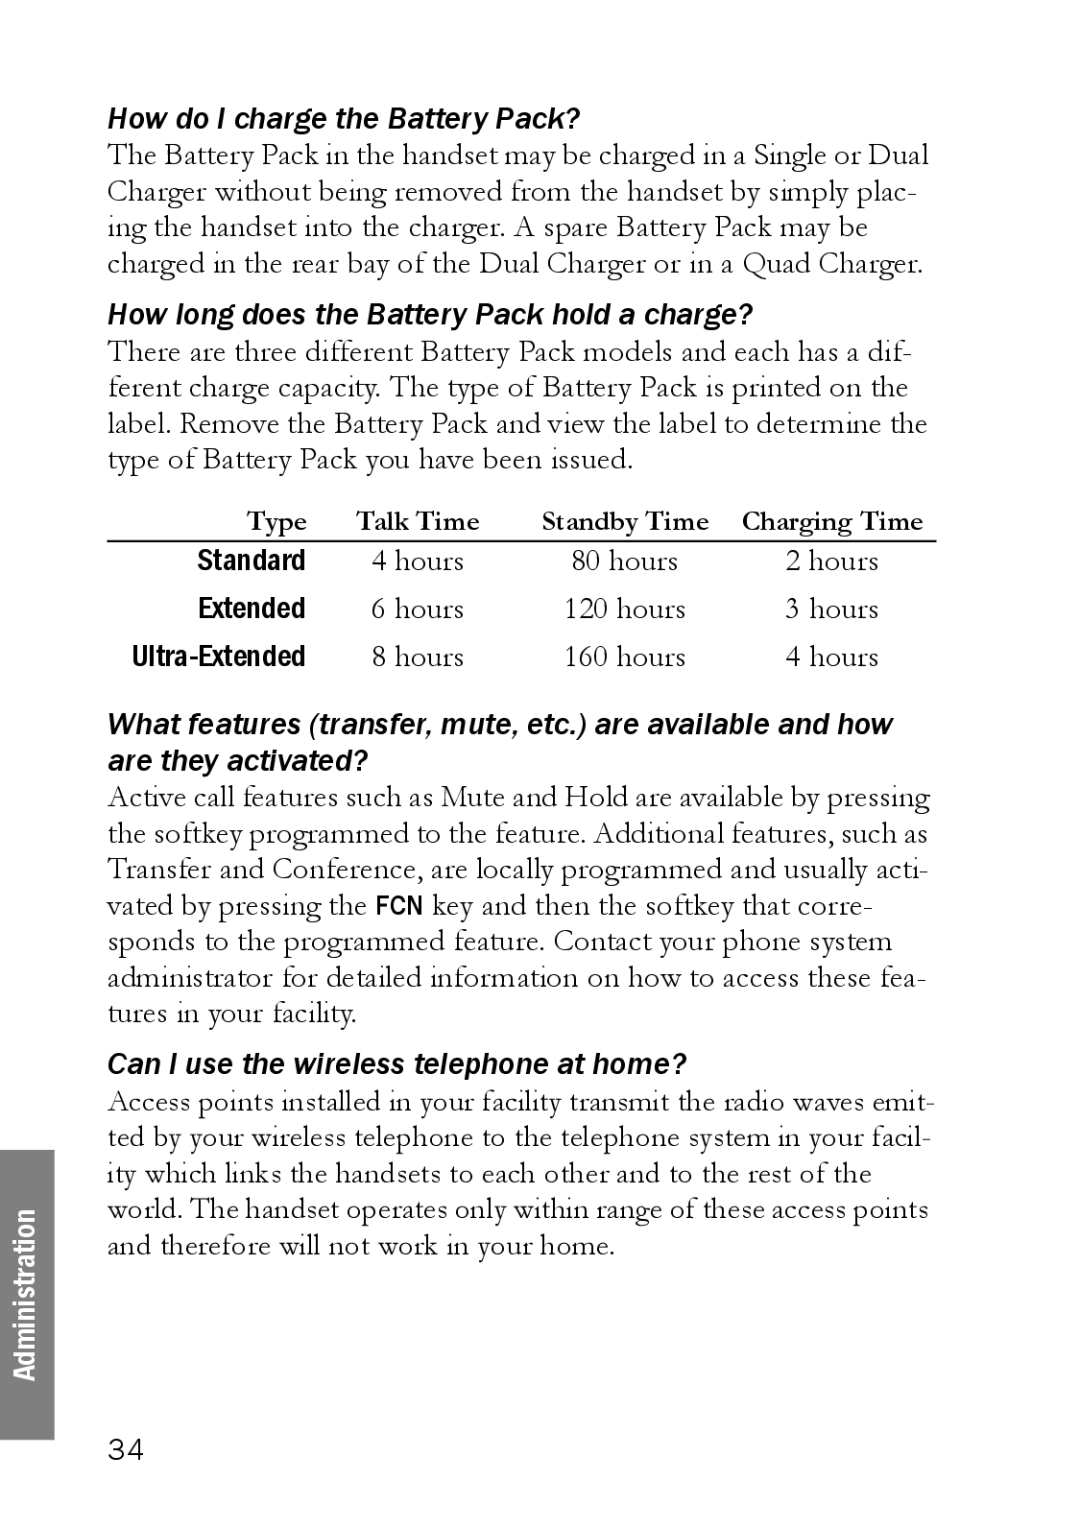 SpectraLink LINK 6020 manual How long does the Battery Pack hold a charge? 